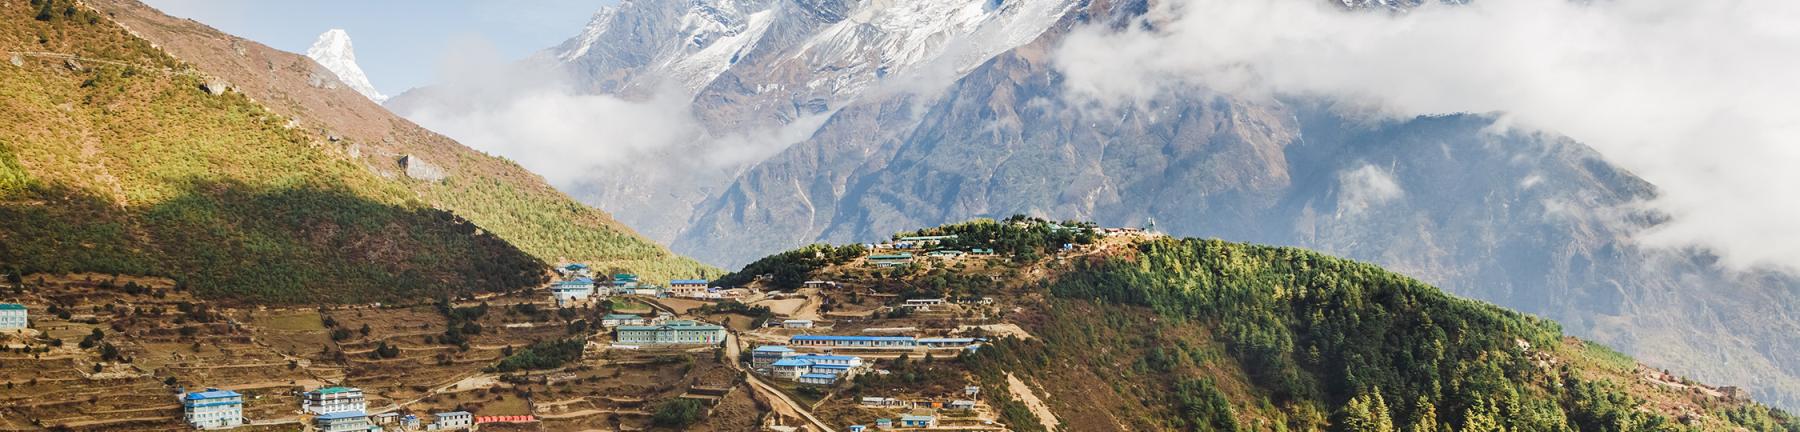 Image of Himalayan village with a snaow capped mountain in the background